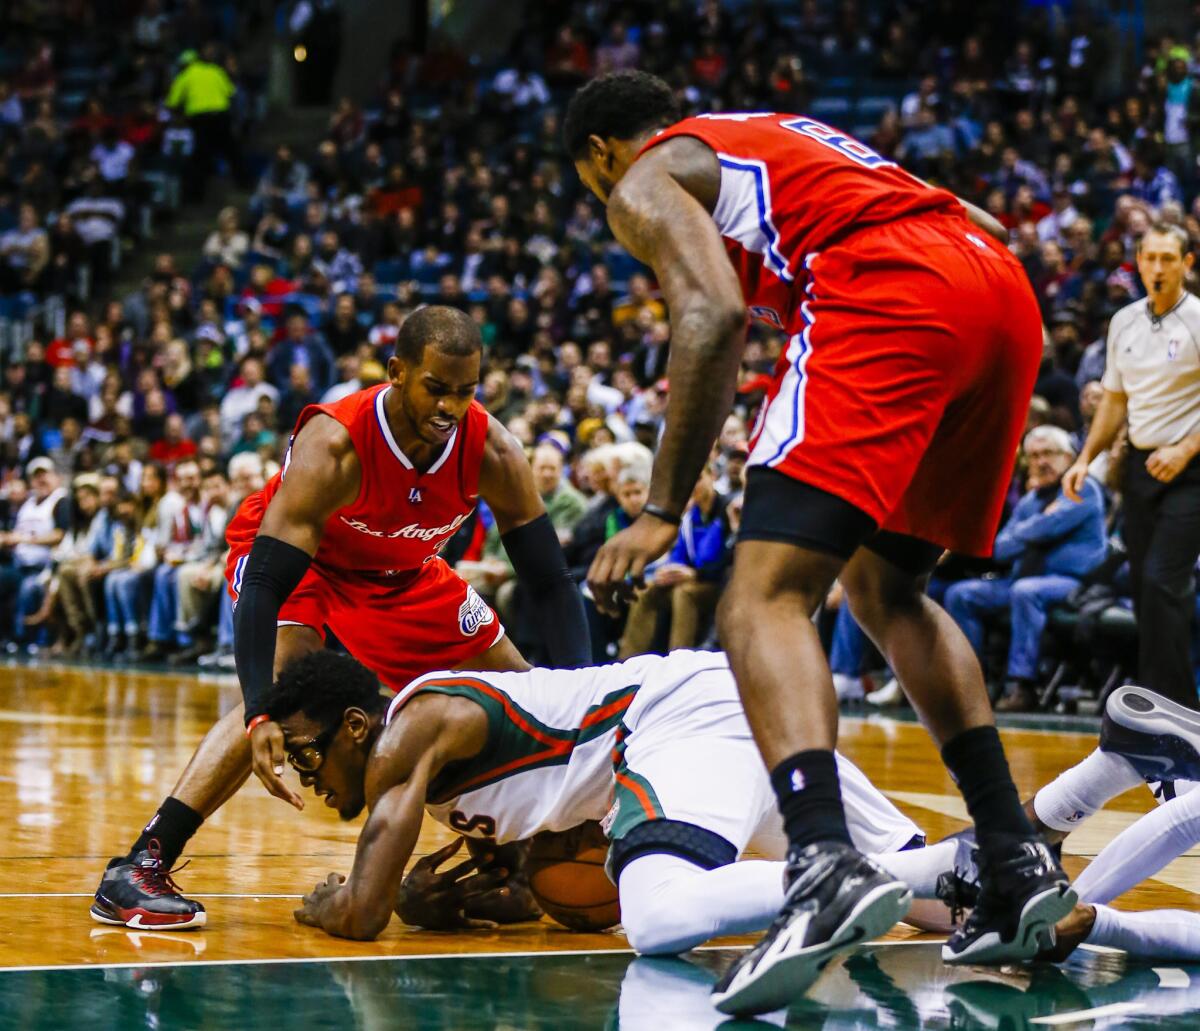 Bucks center Larry Sanders dives onto a loose ball between Clippers point guard Chris Paul and center DeAndre Jordan in the second half.